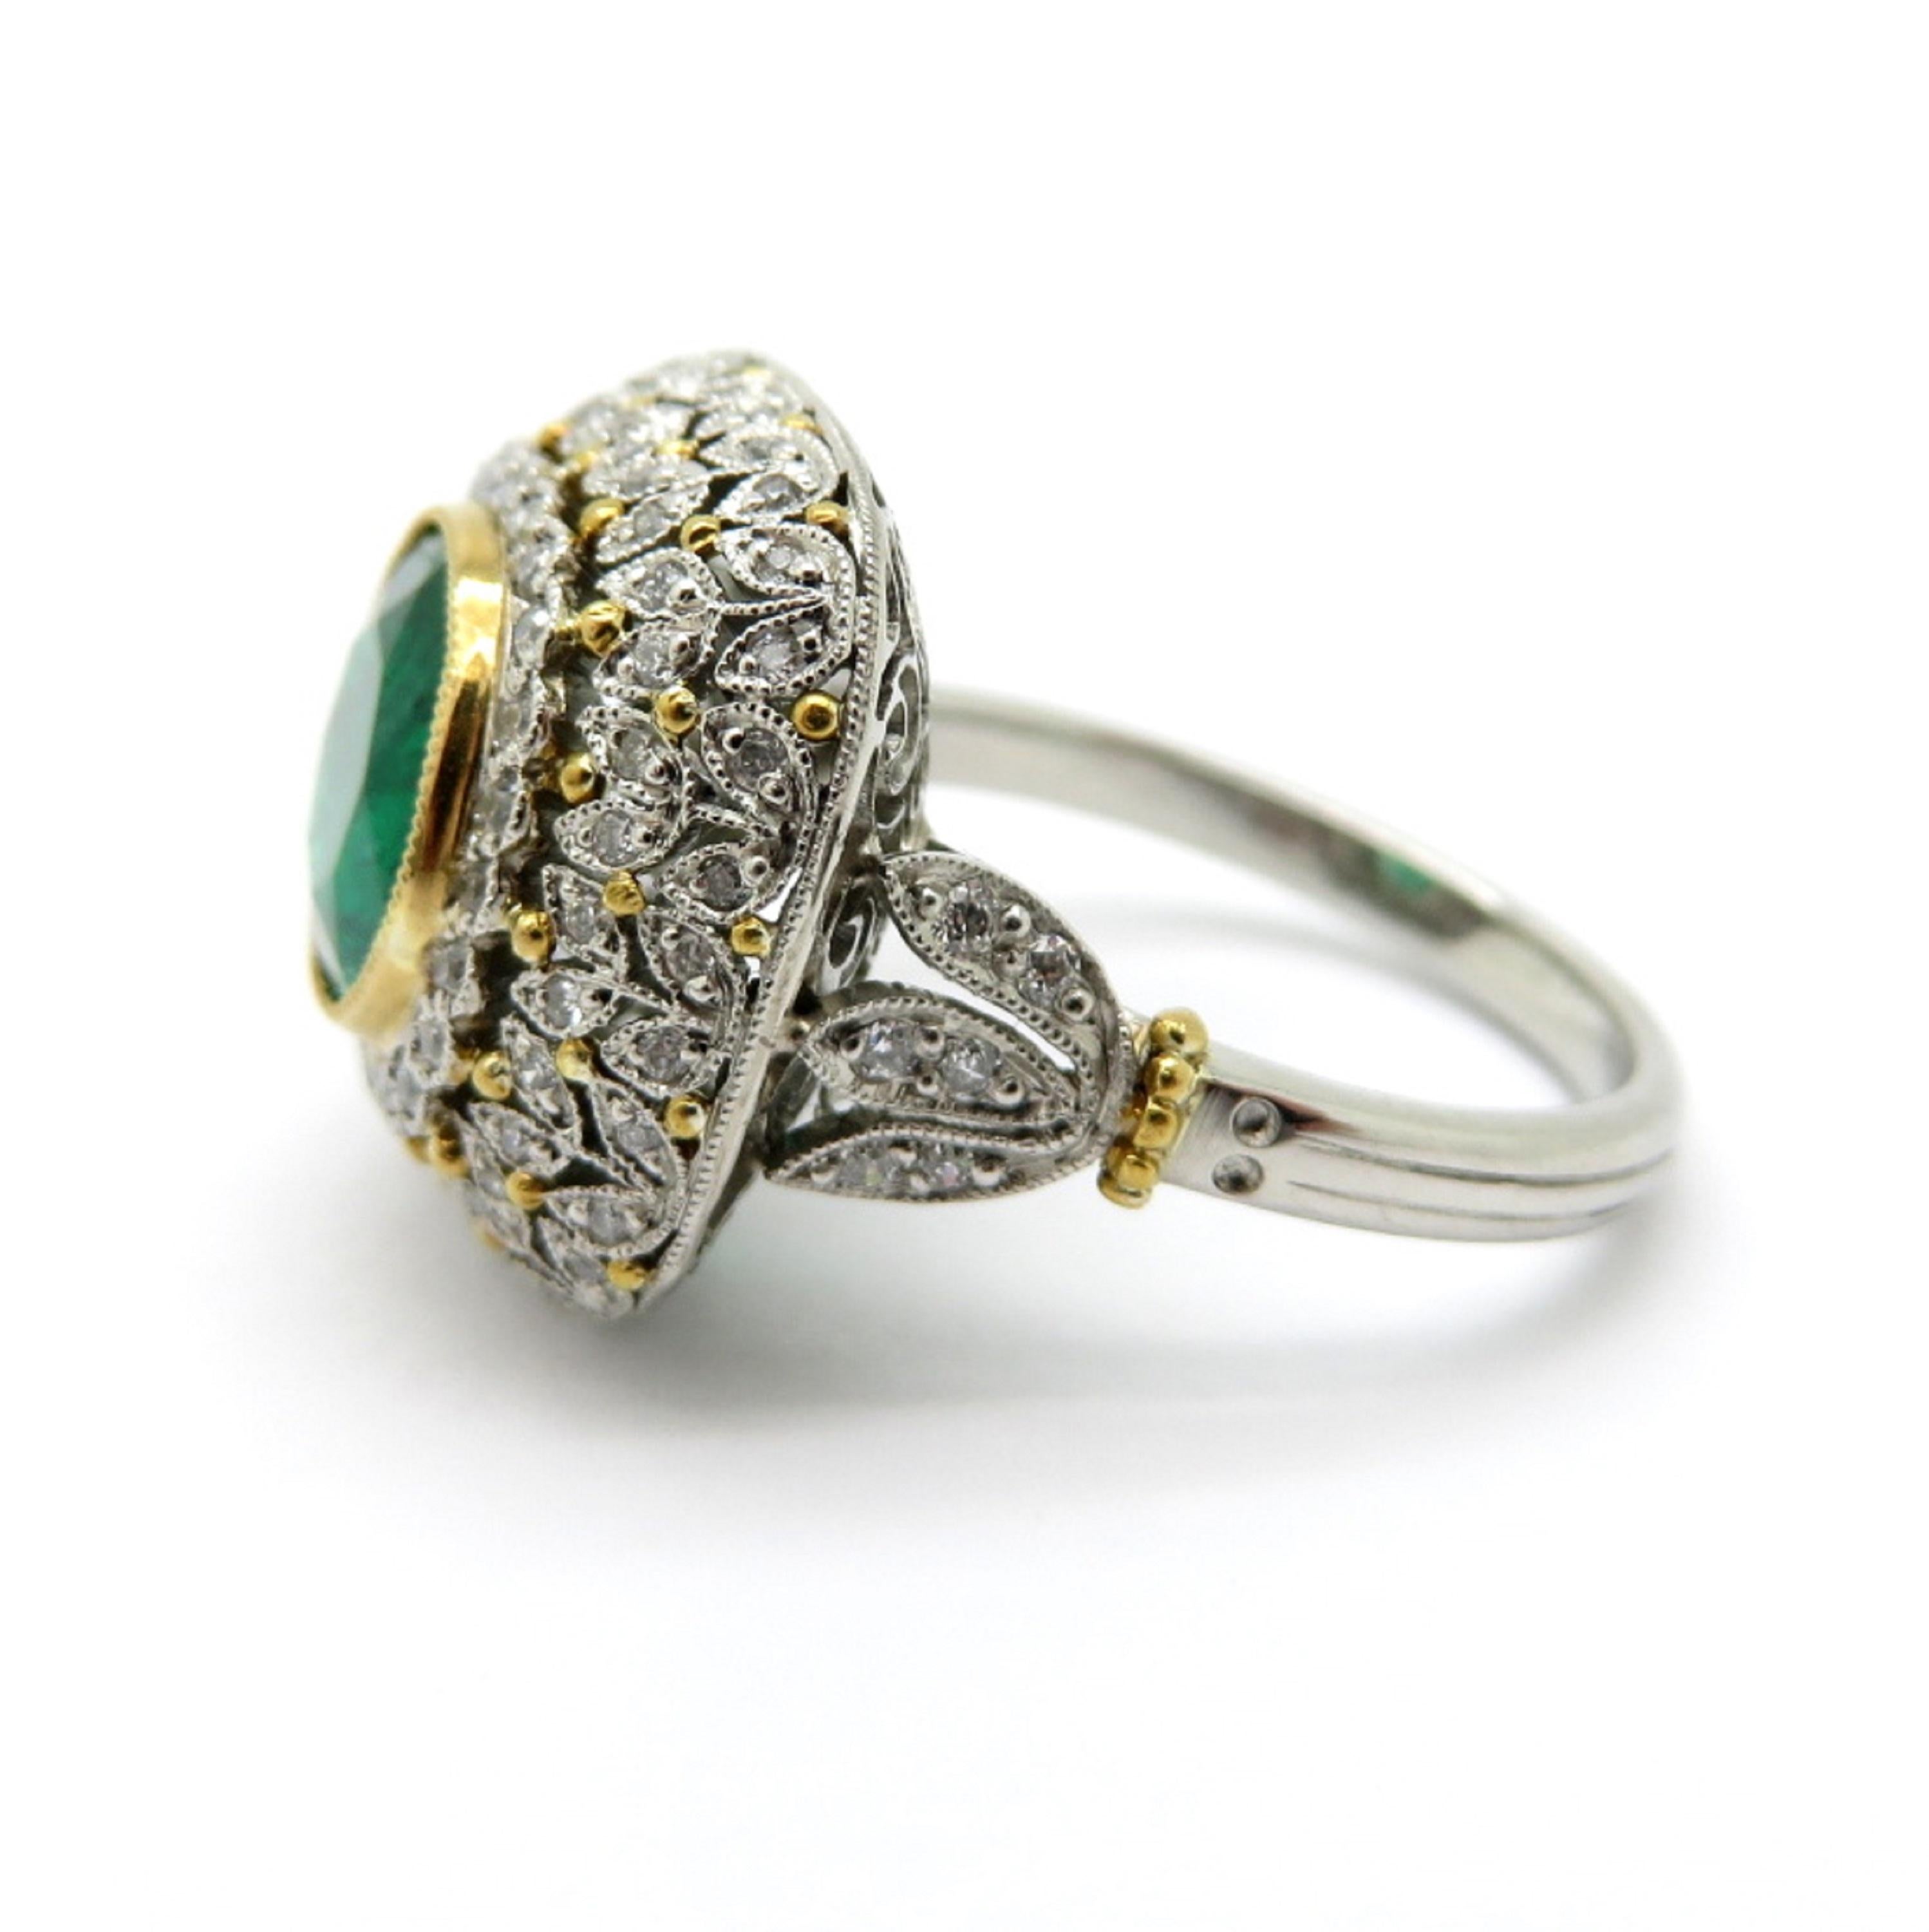 For sale is an Estate Platinum and 18K Yellow Gold Victorian Diamond & Emerald Flower Ring!
Showcasing one round brilliant cut fine quality Emerald weighing 3.07 carats.
Accented by numerous round brilliant cut diamonds, bead set, weighing a